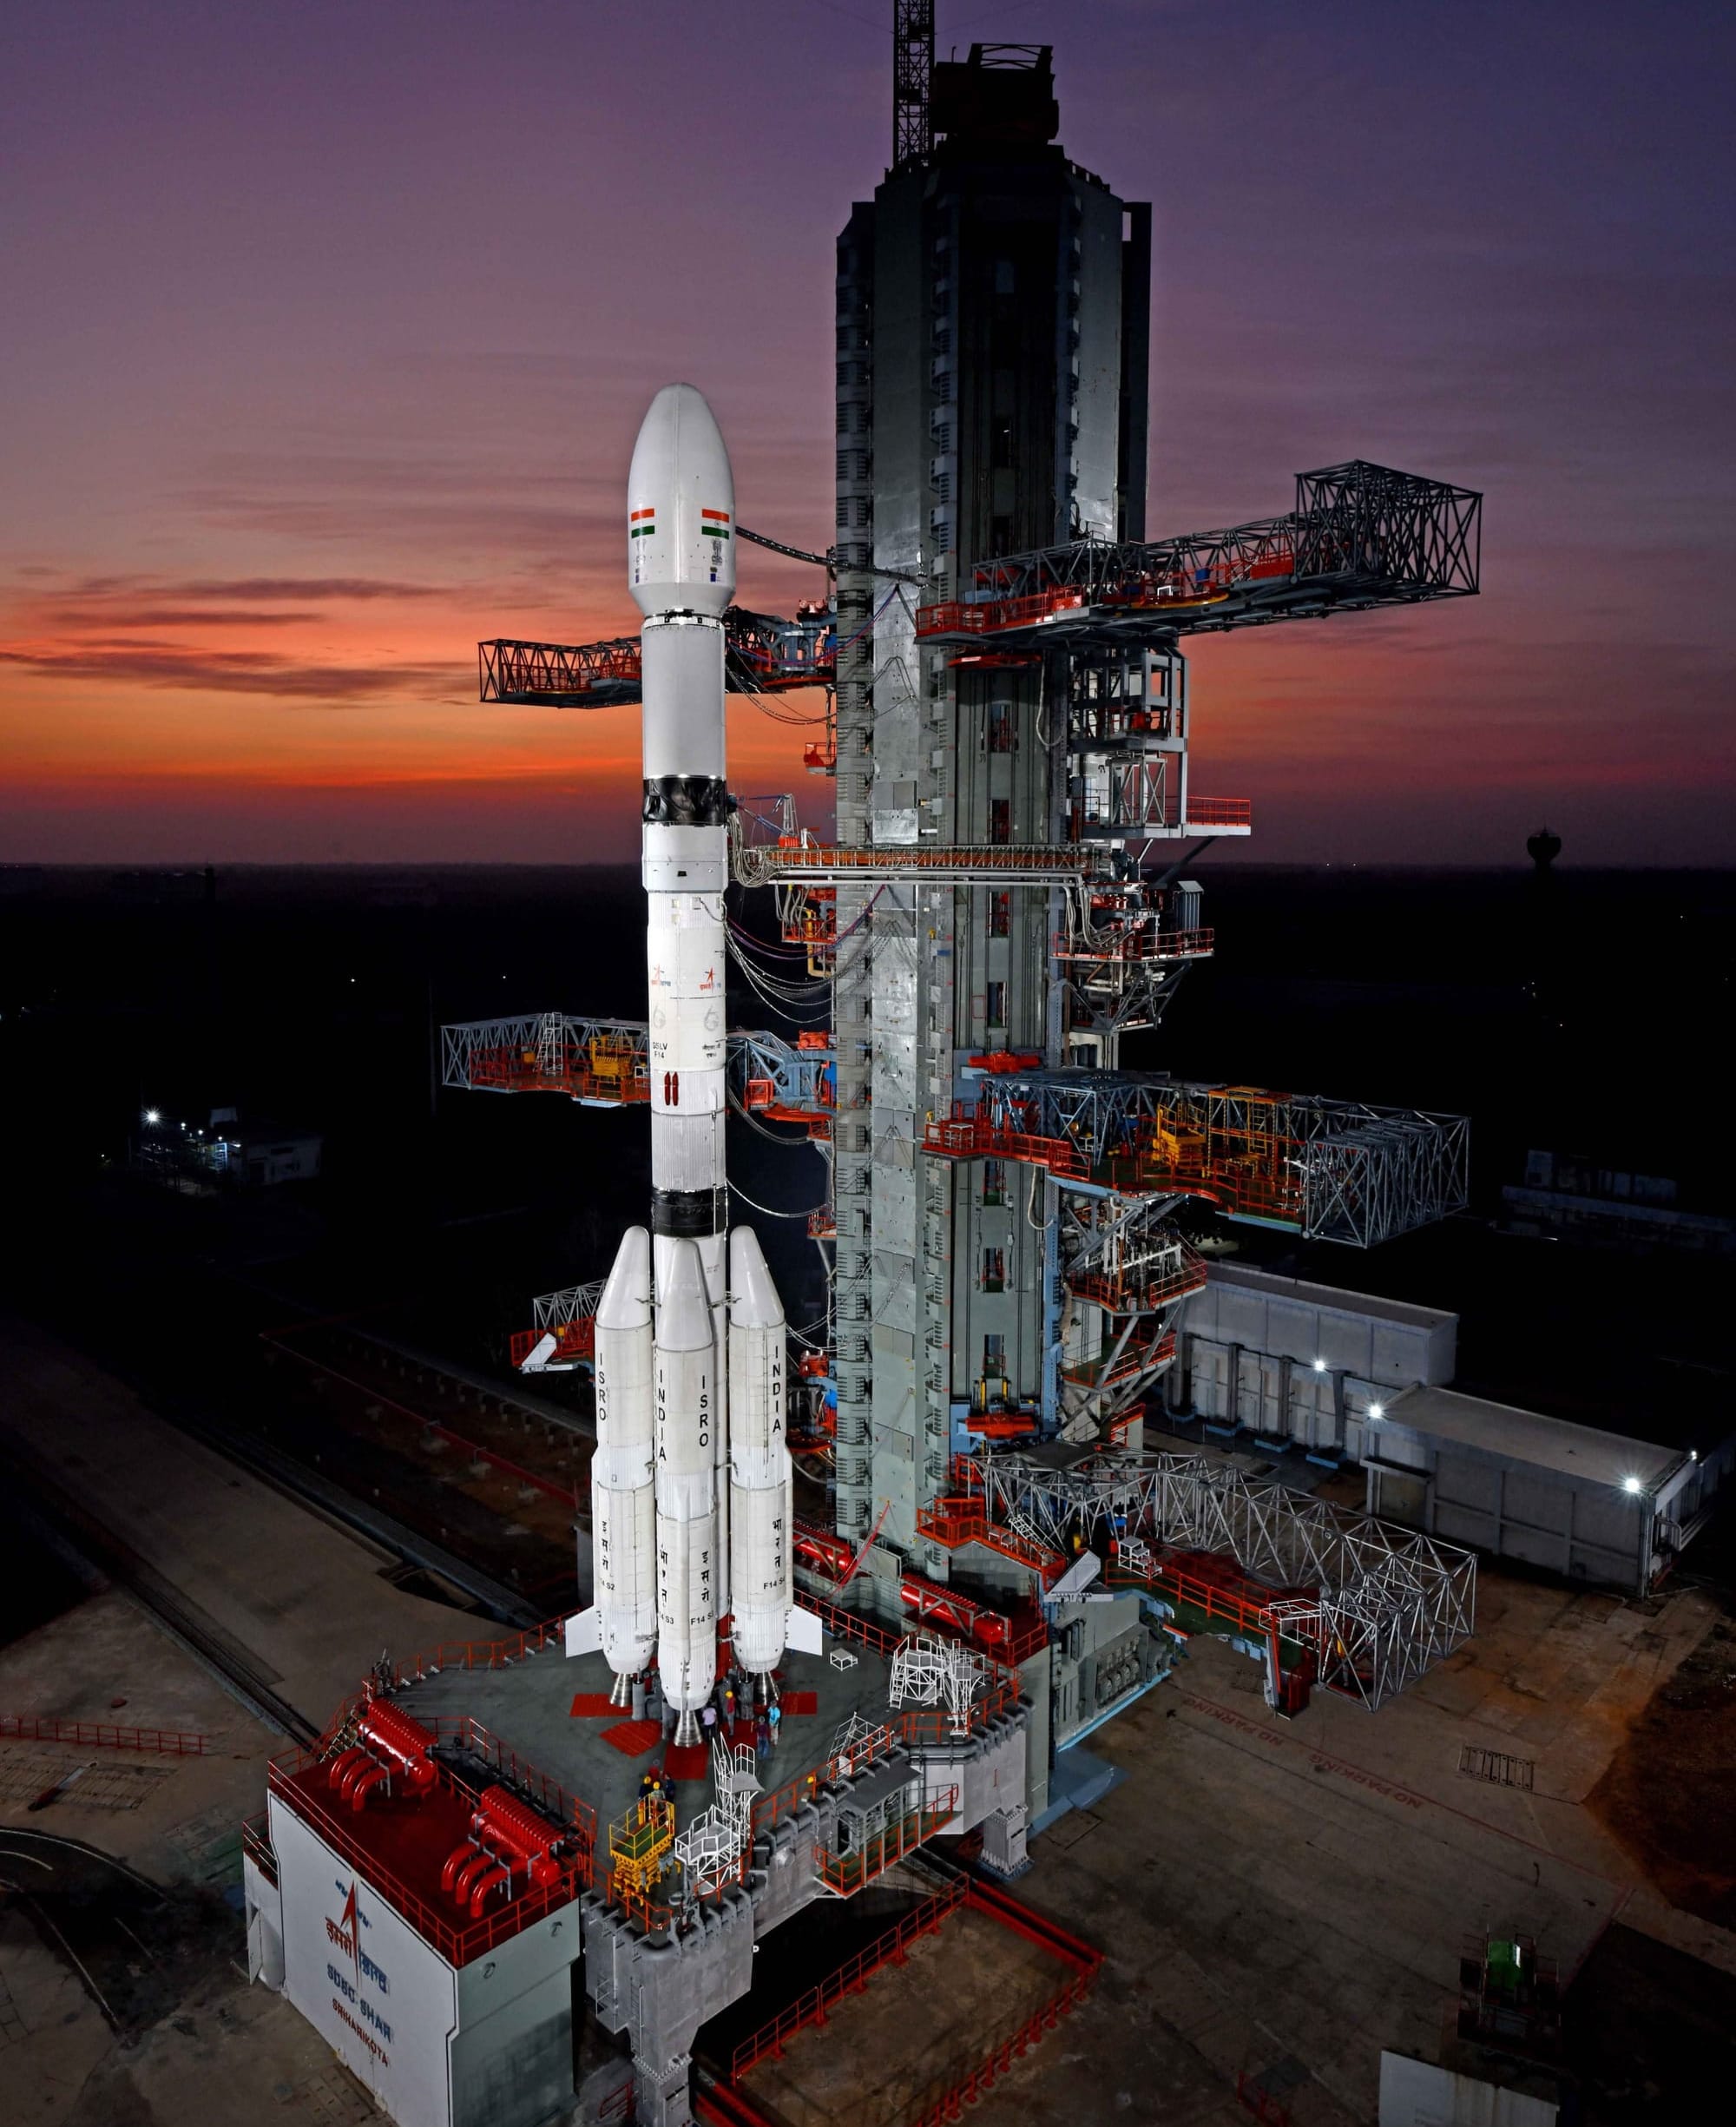 GLSV Mk II on the launch pad at the Satish Dhawan Space Center for INSAT-3DS. ©ISRO